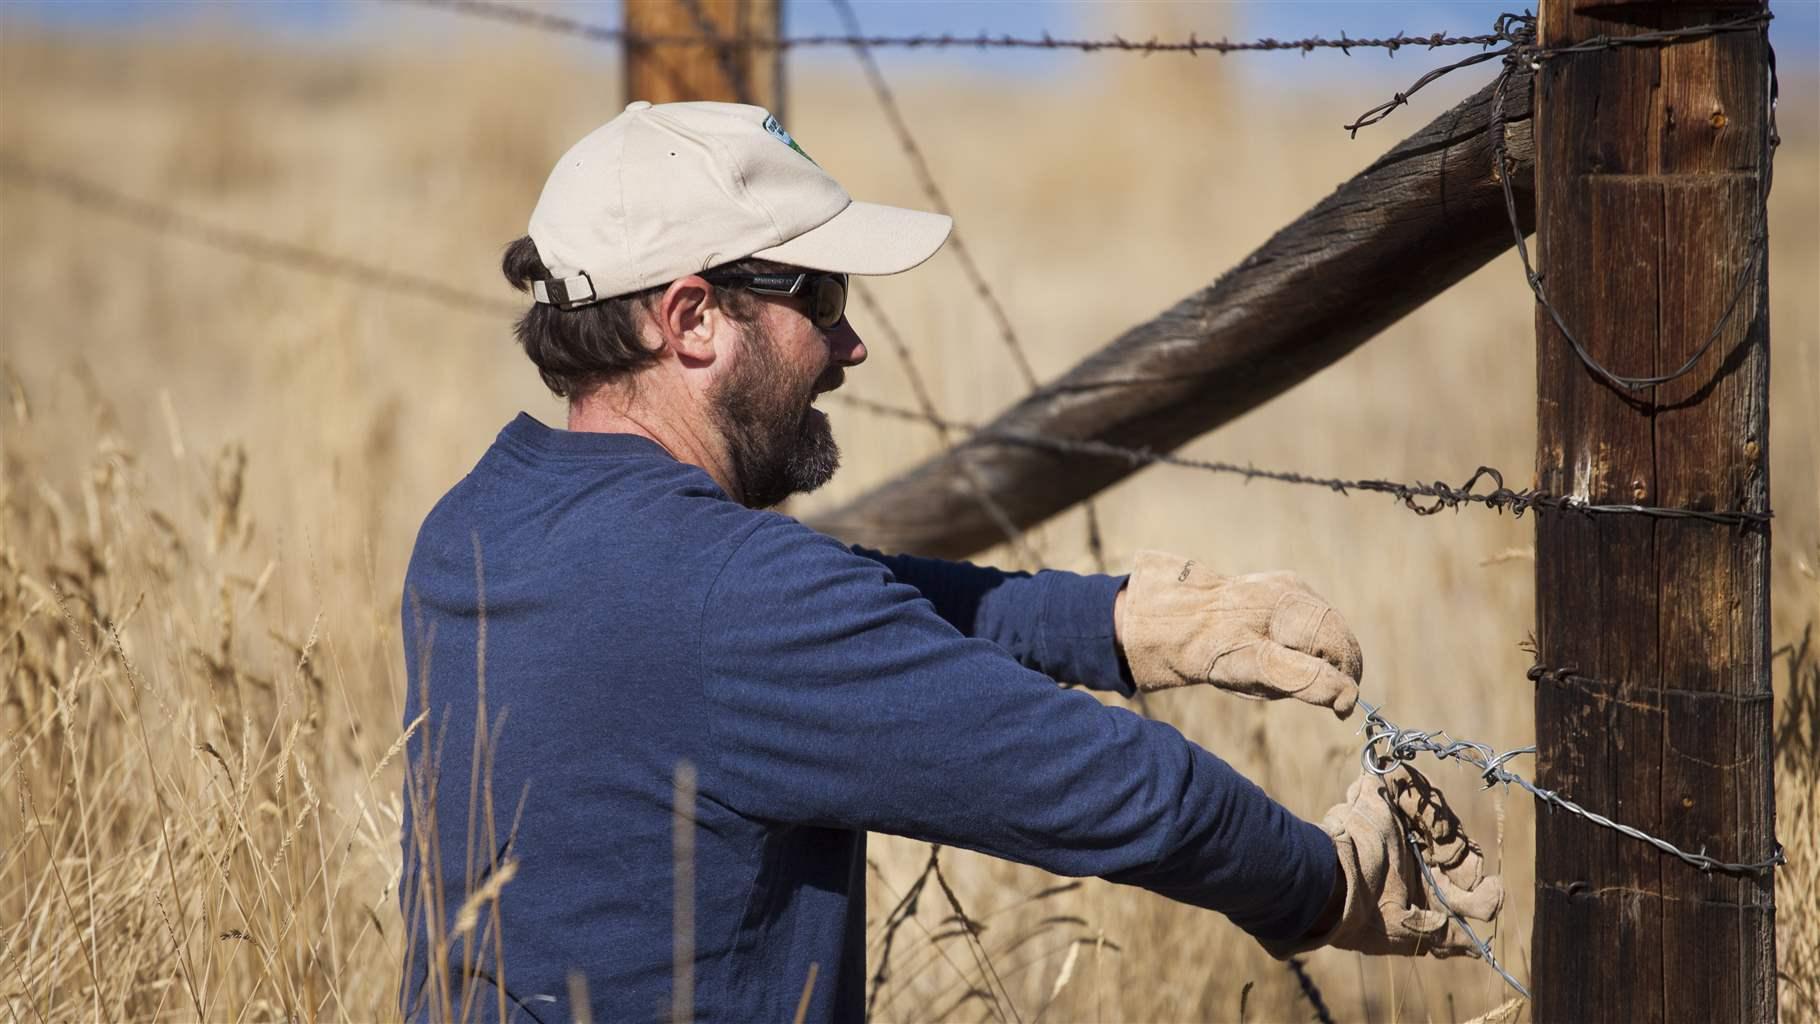 A Bureau of Land Management volunteer helps remove antiquated fencing—which will be replaced with wildlife-friendly fencing—along a pronghorn migration corridor in Wyoming.